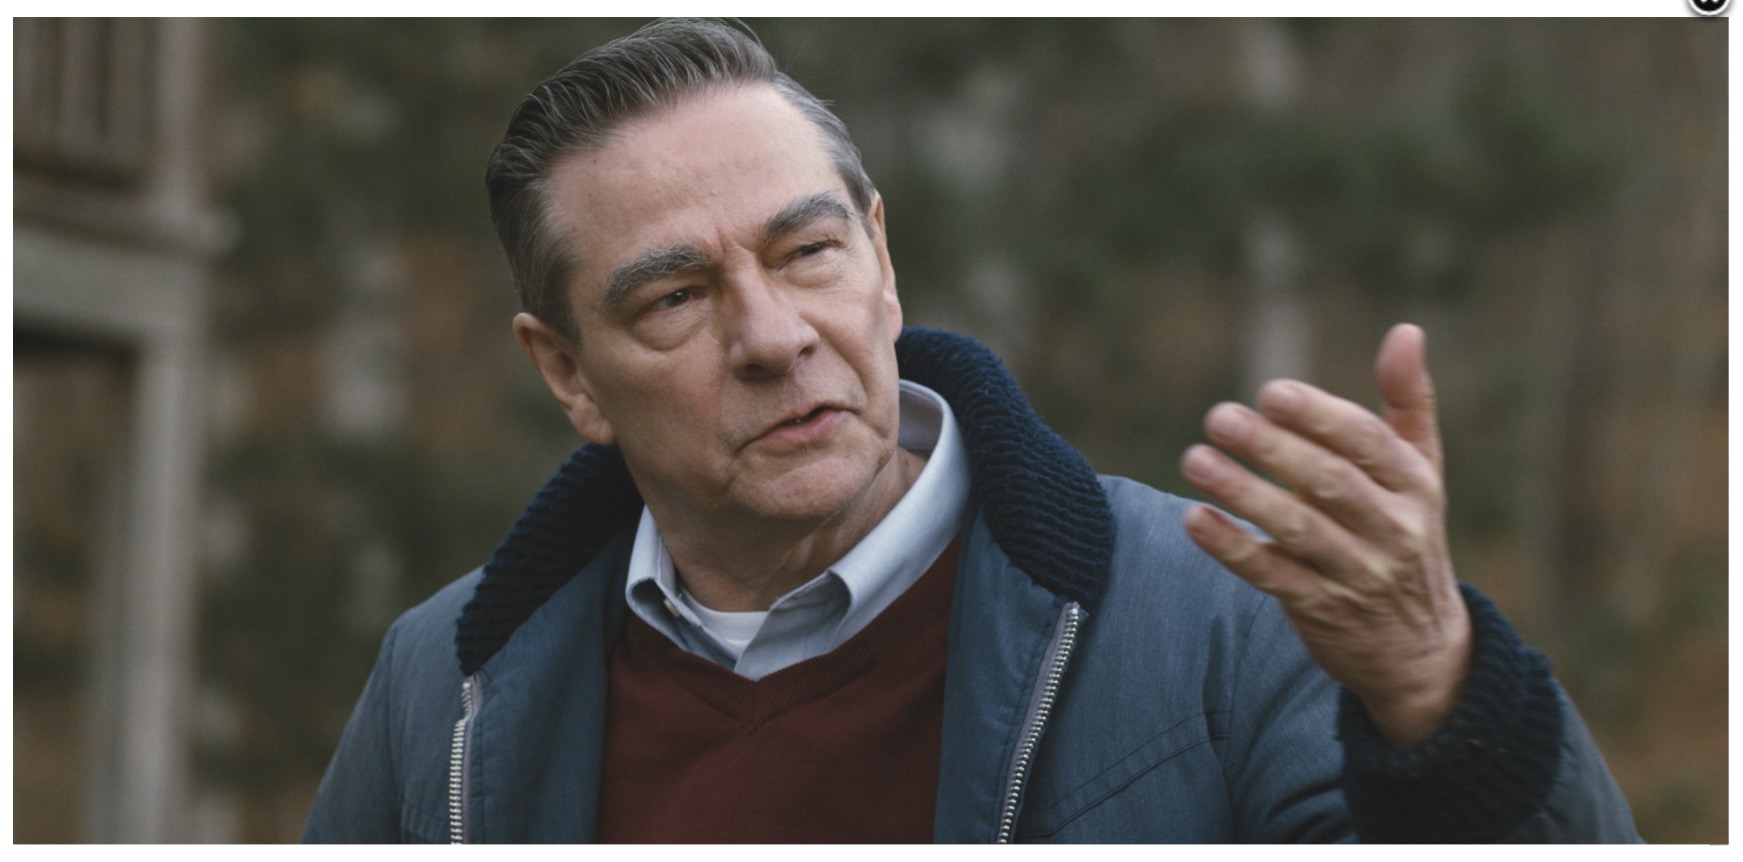 Chris Cooper as J.D. Salinger in Coming Through the Rye. Makeup & Special FX Makeup by Tara DiPetriilo